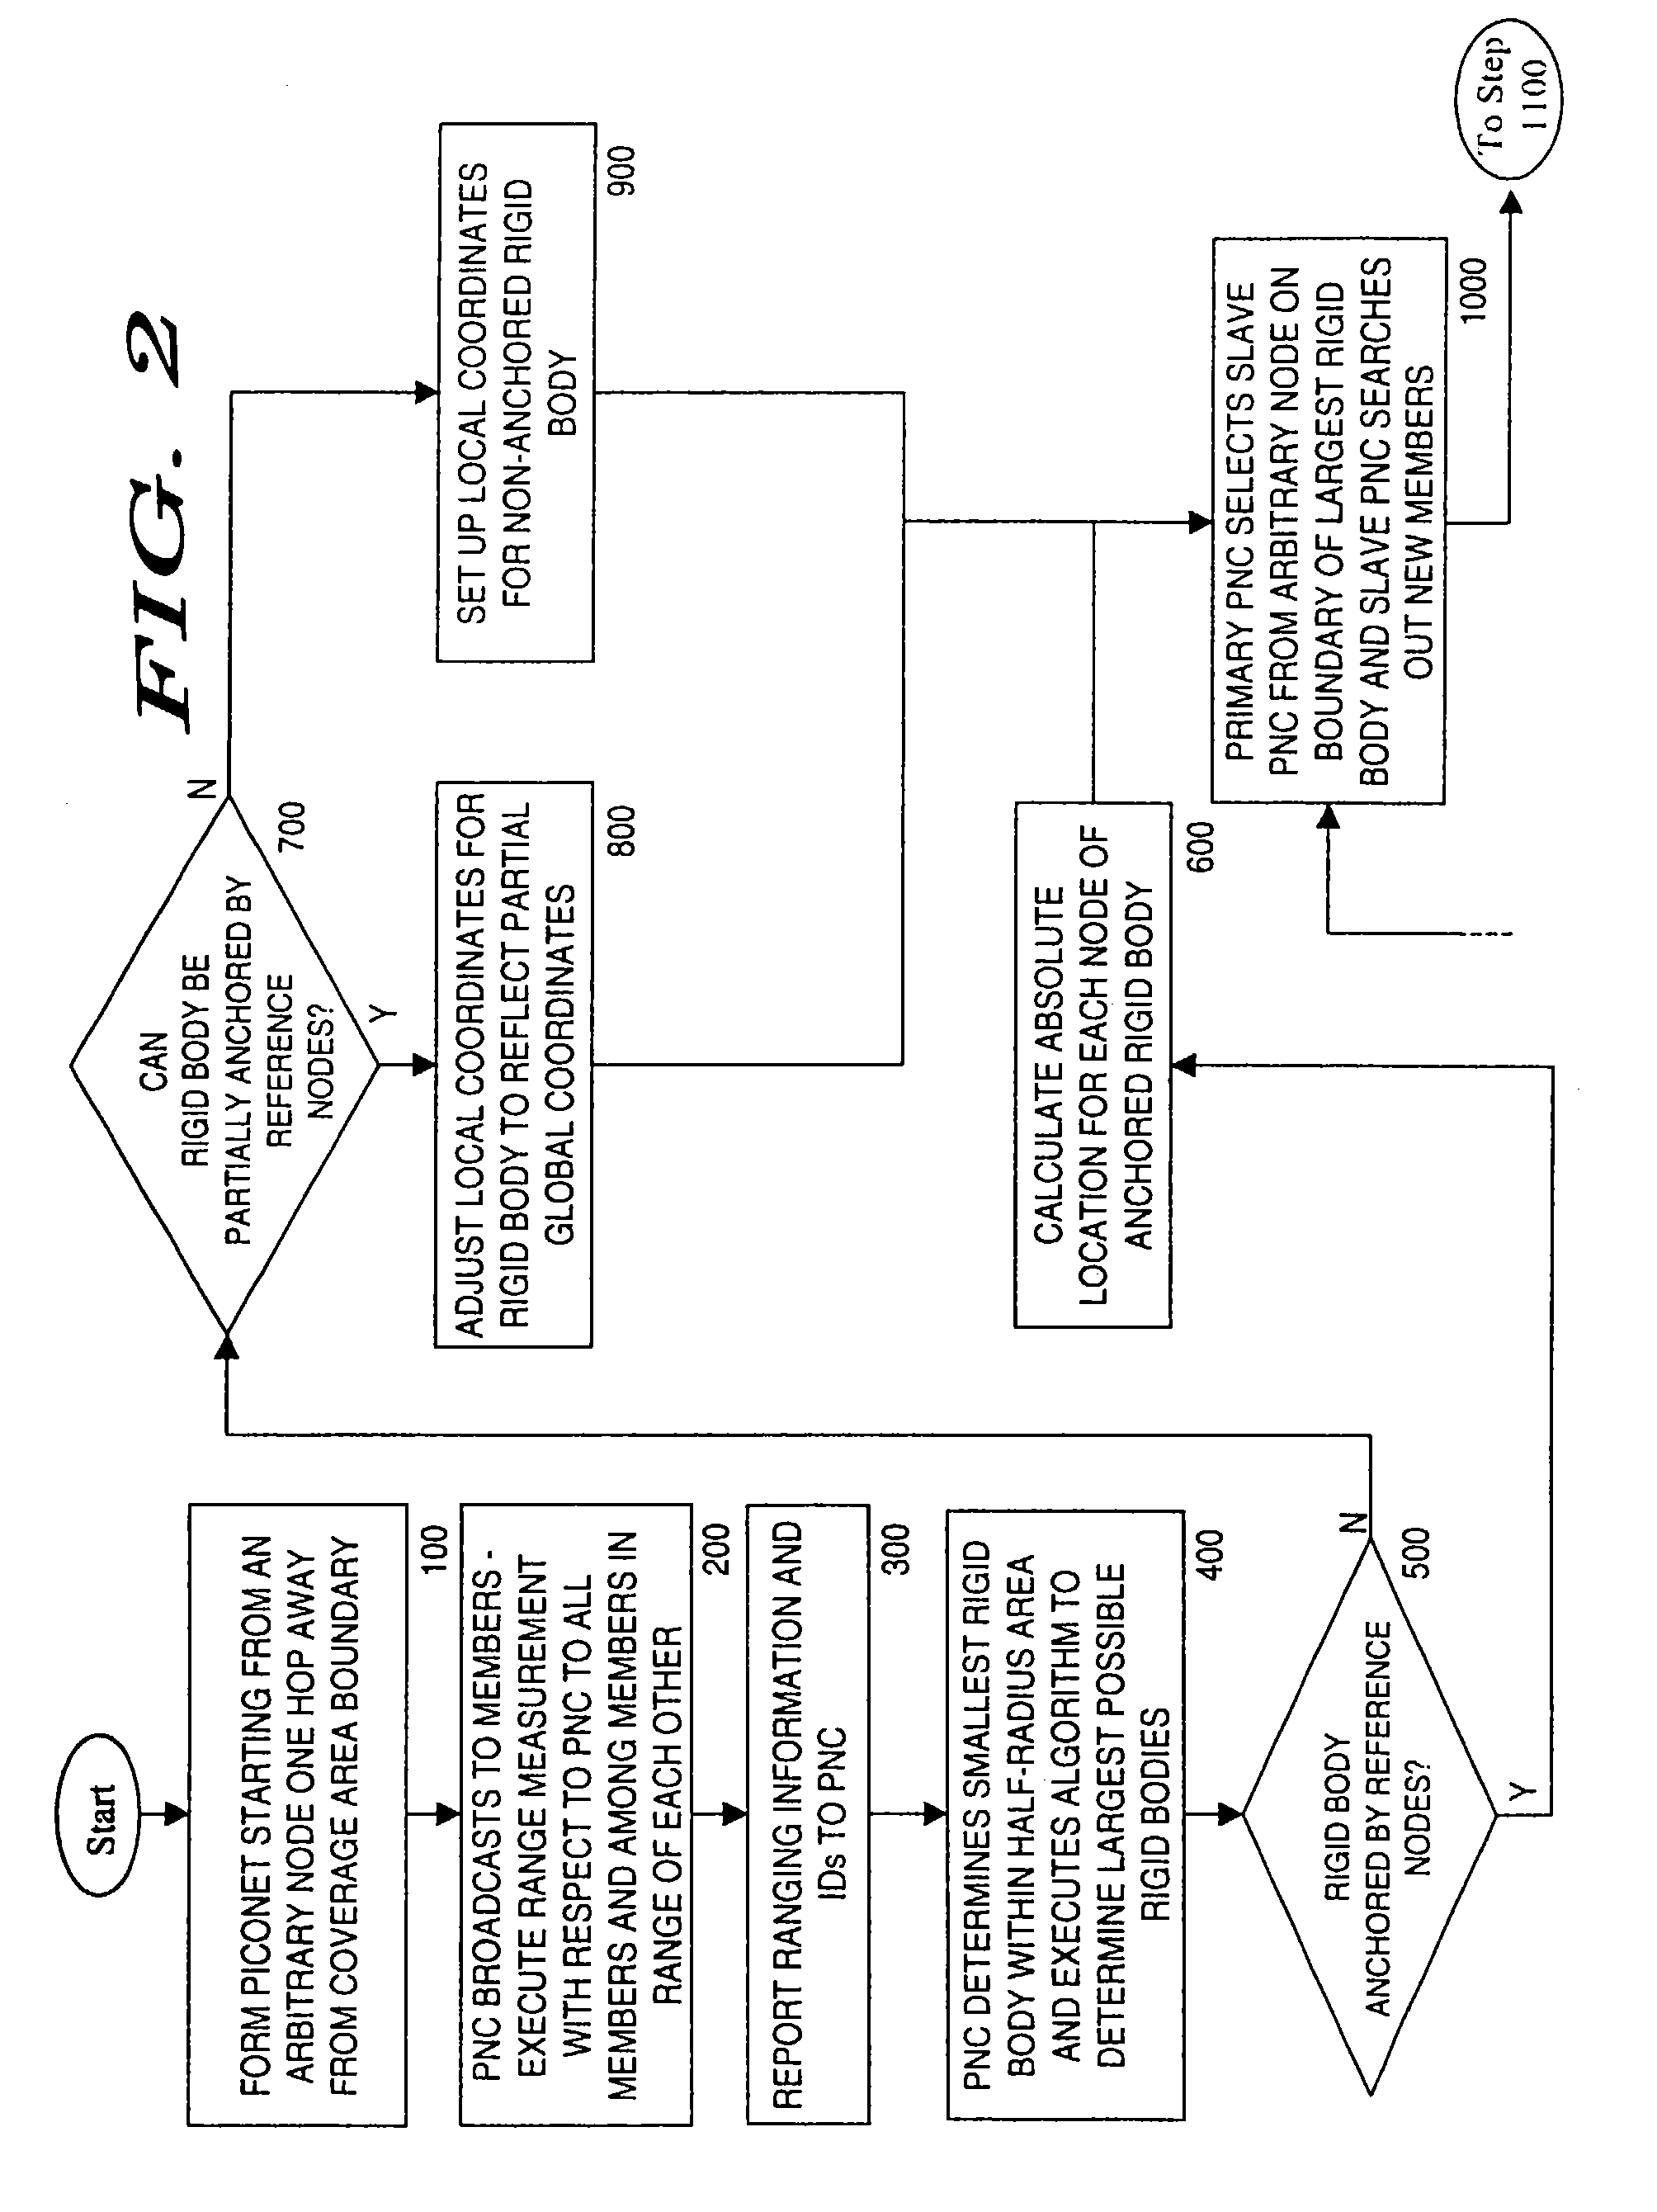 Method for rigid body discovery and peer-to-peer ranging in a scatternet and communications node